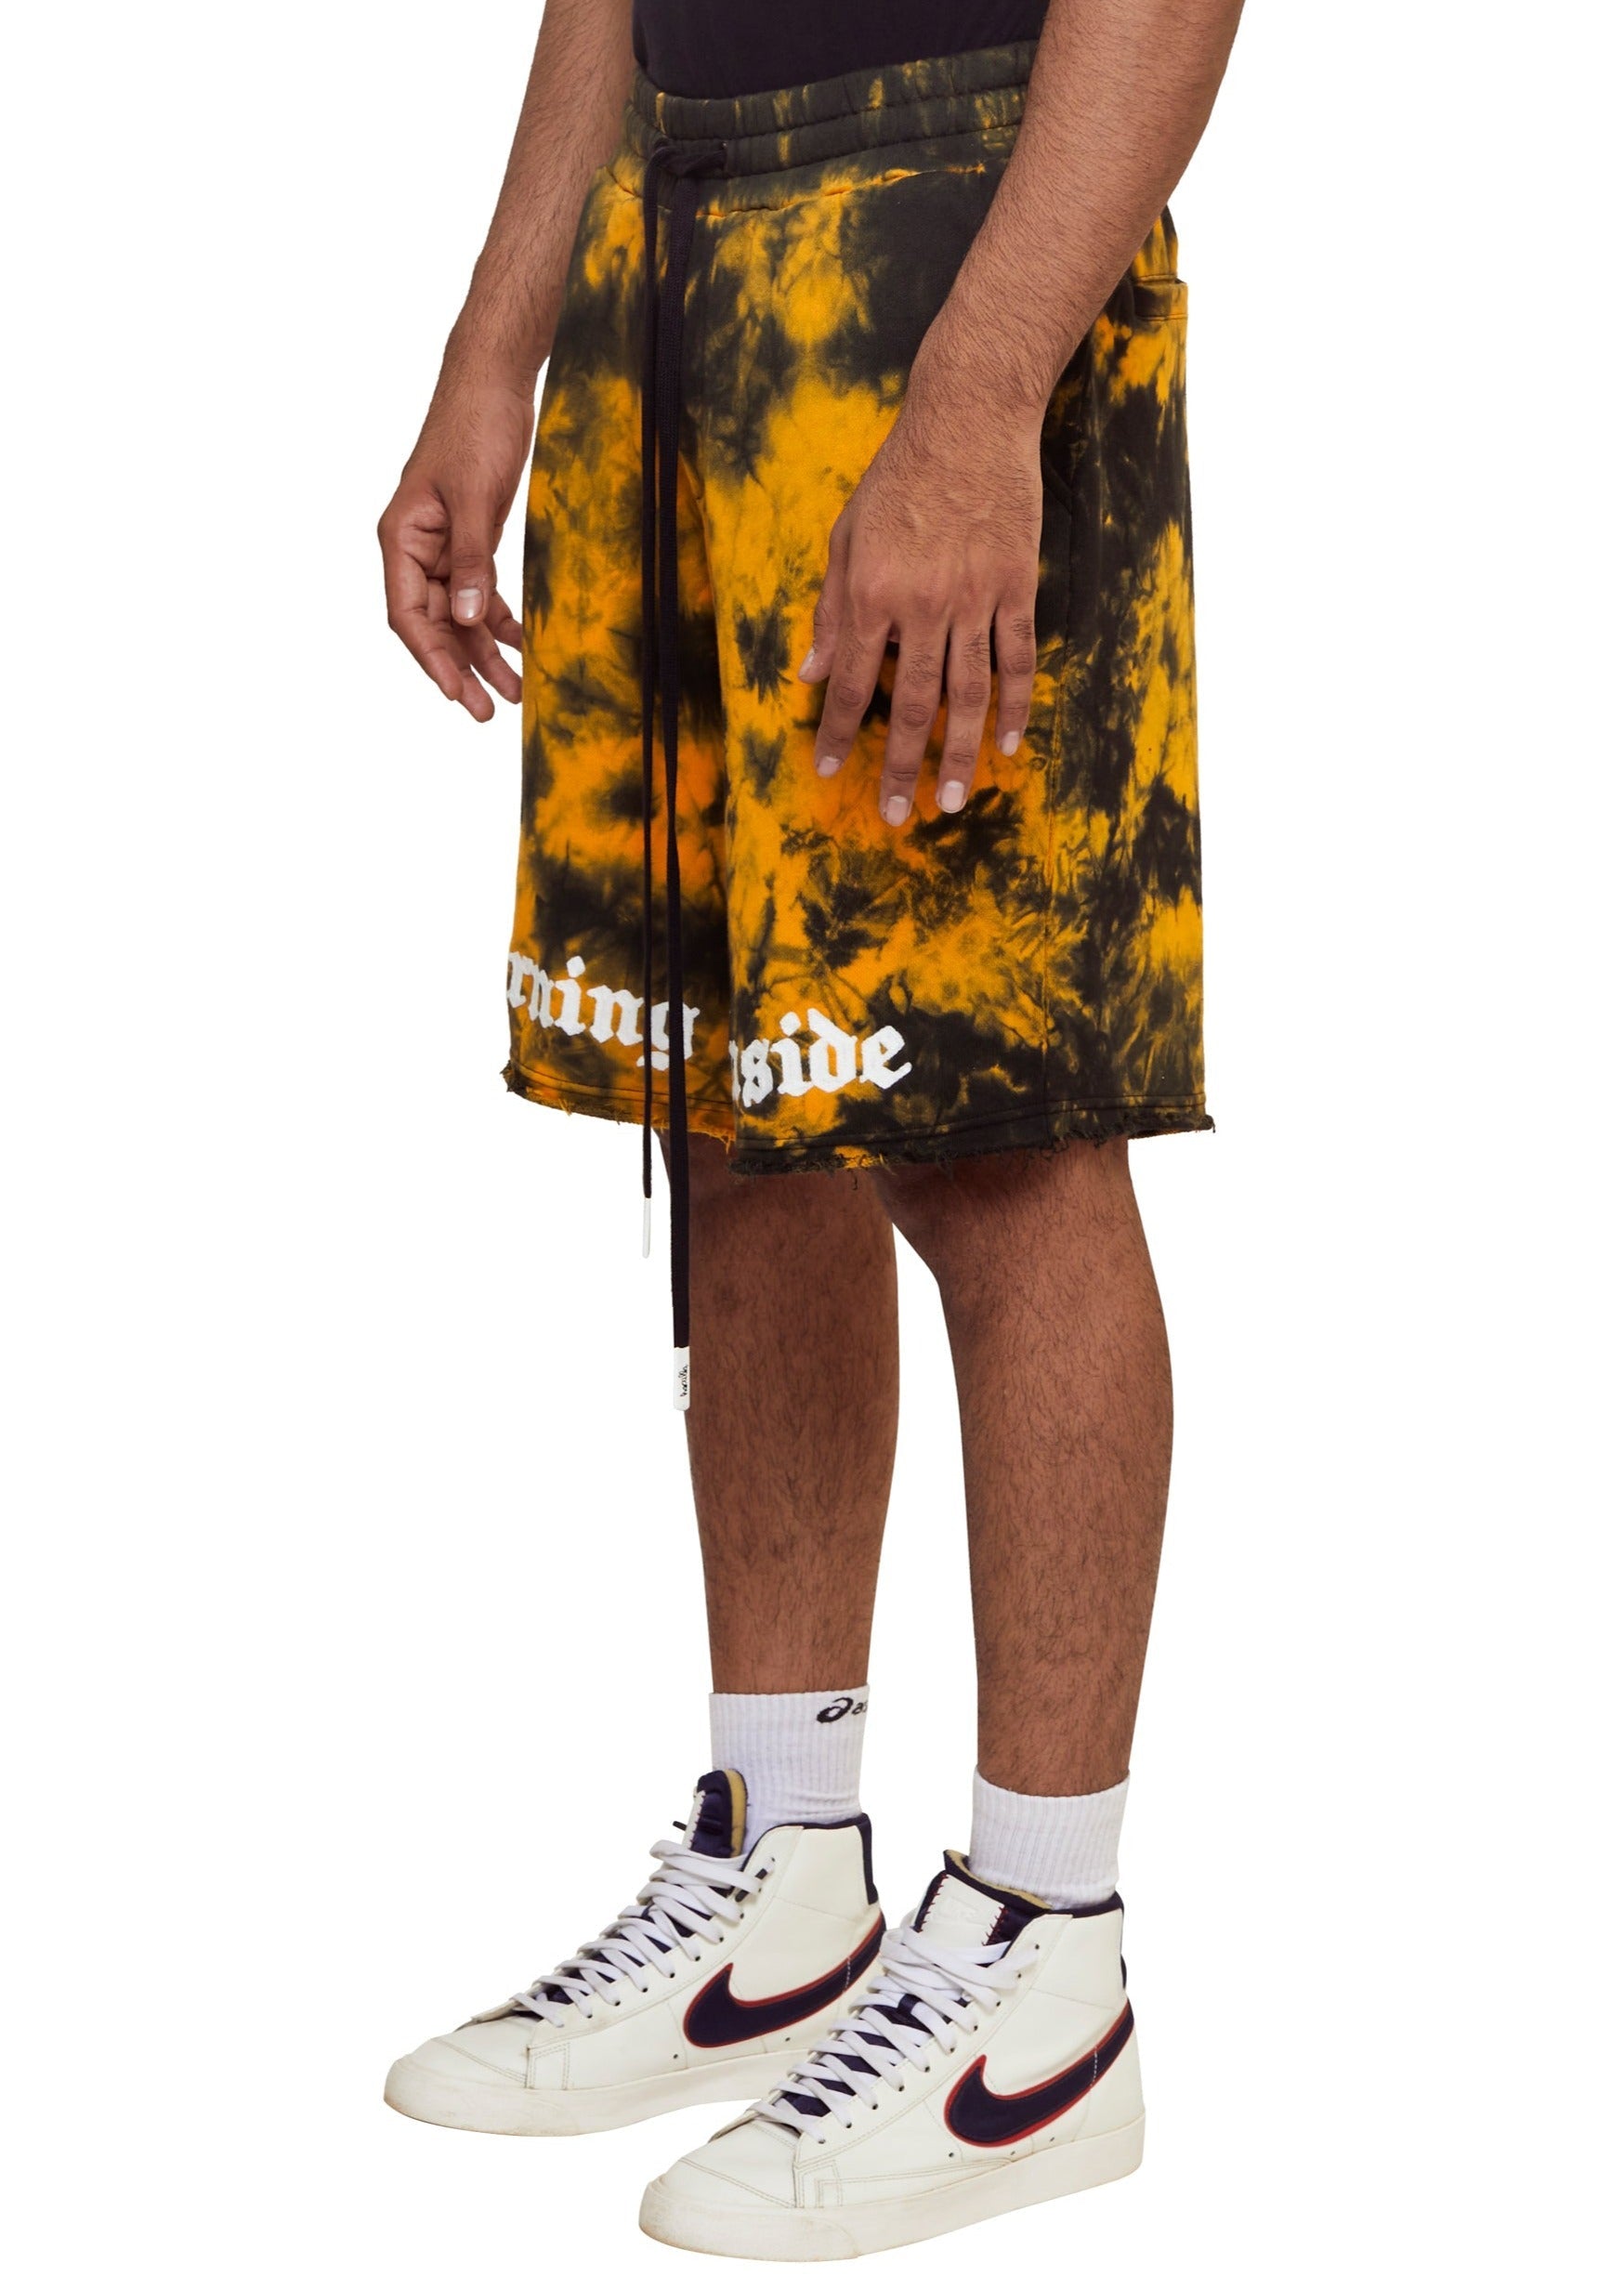 Yellow Fire tie-dye knit shorts with chenille embroidery "Burning Inside" above the hem from the brand Haculla